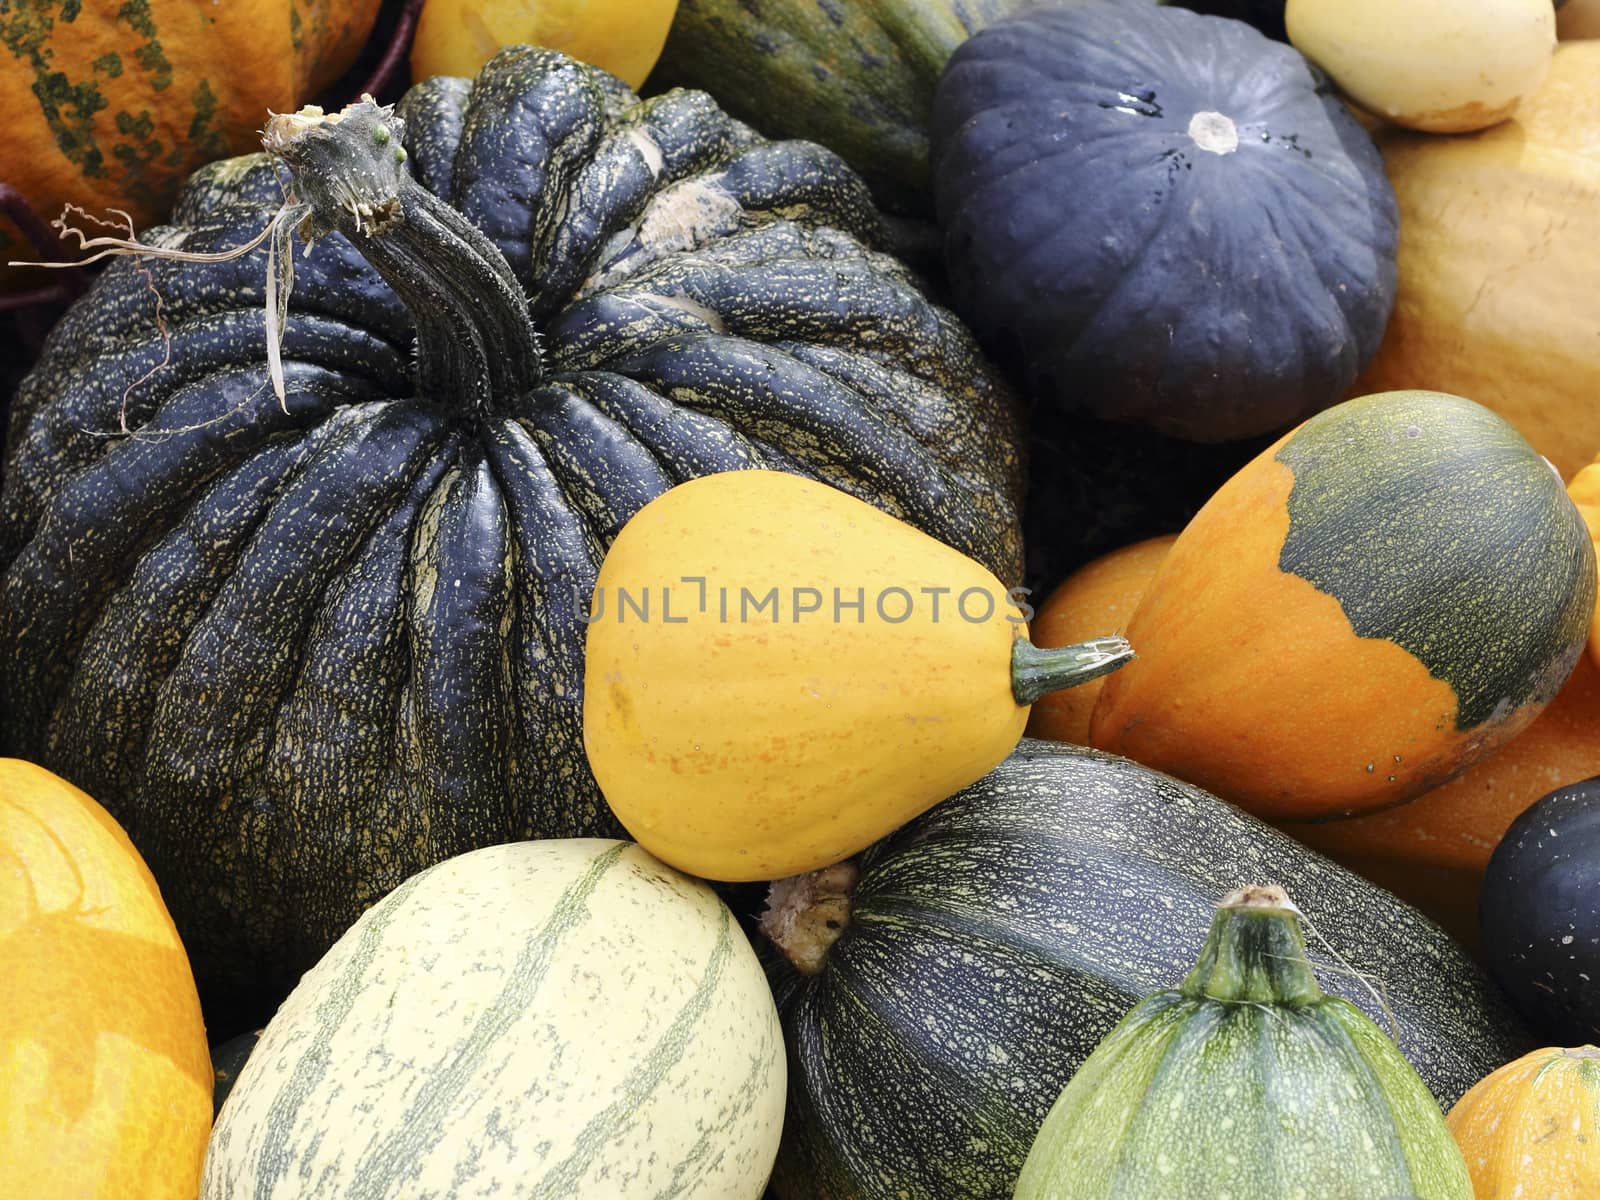 Varieties of pumpkins and squashes by openas